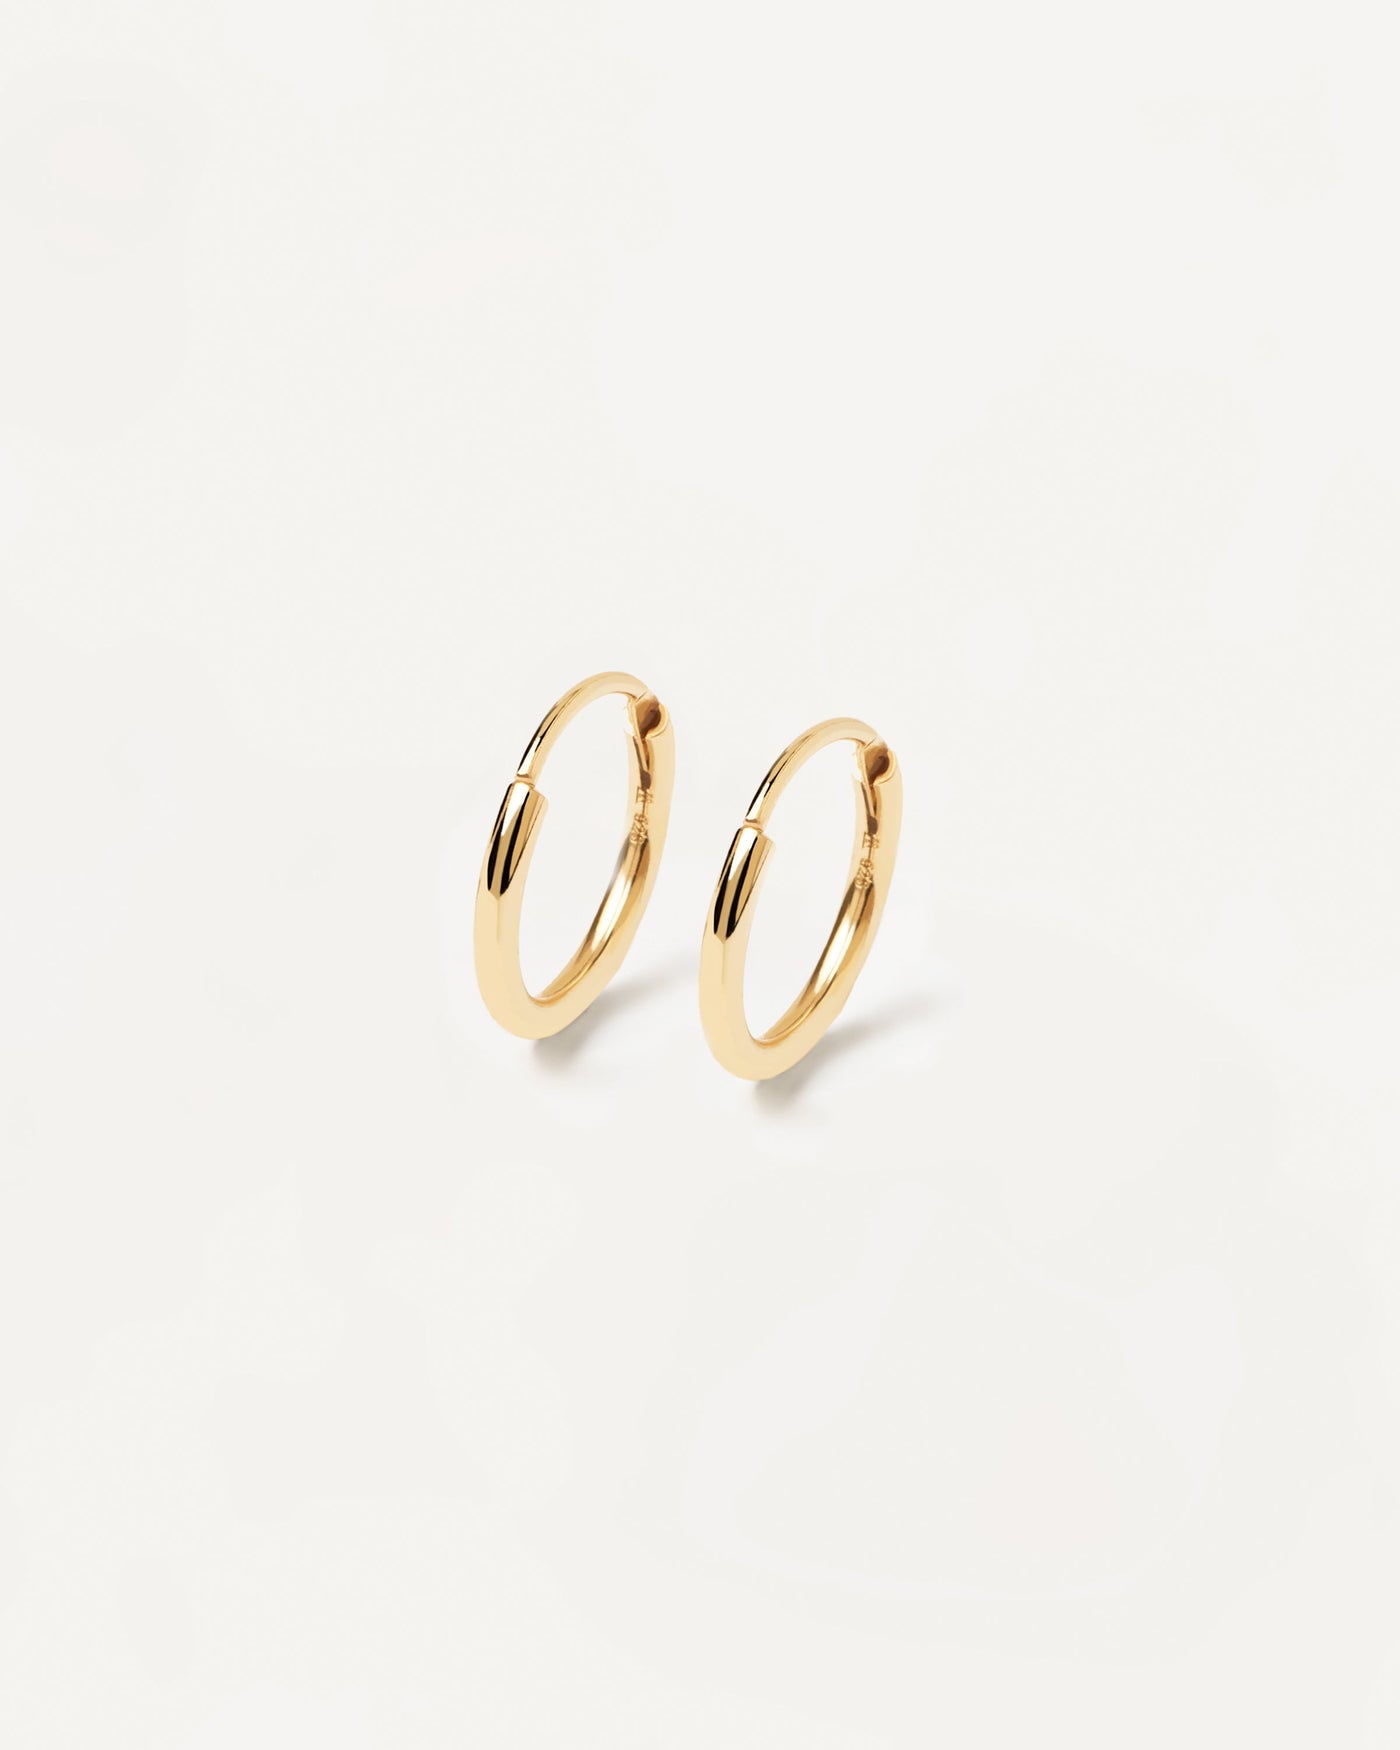 2023 Selection | Mini Hoops. Dainty hoops in gold-plated sterling silver. Get the latest arrival from PDPAOLA. Place your order safely and get this Best Seller. Free Shipping.